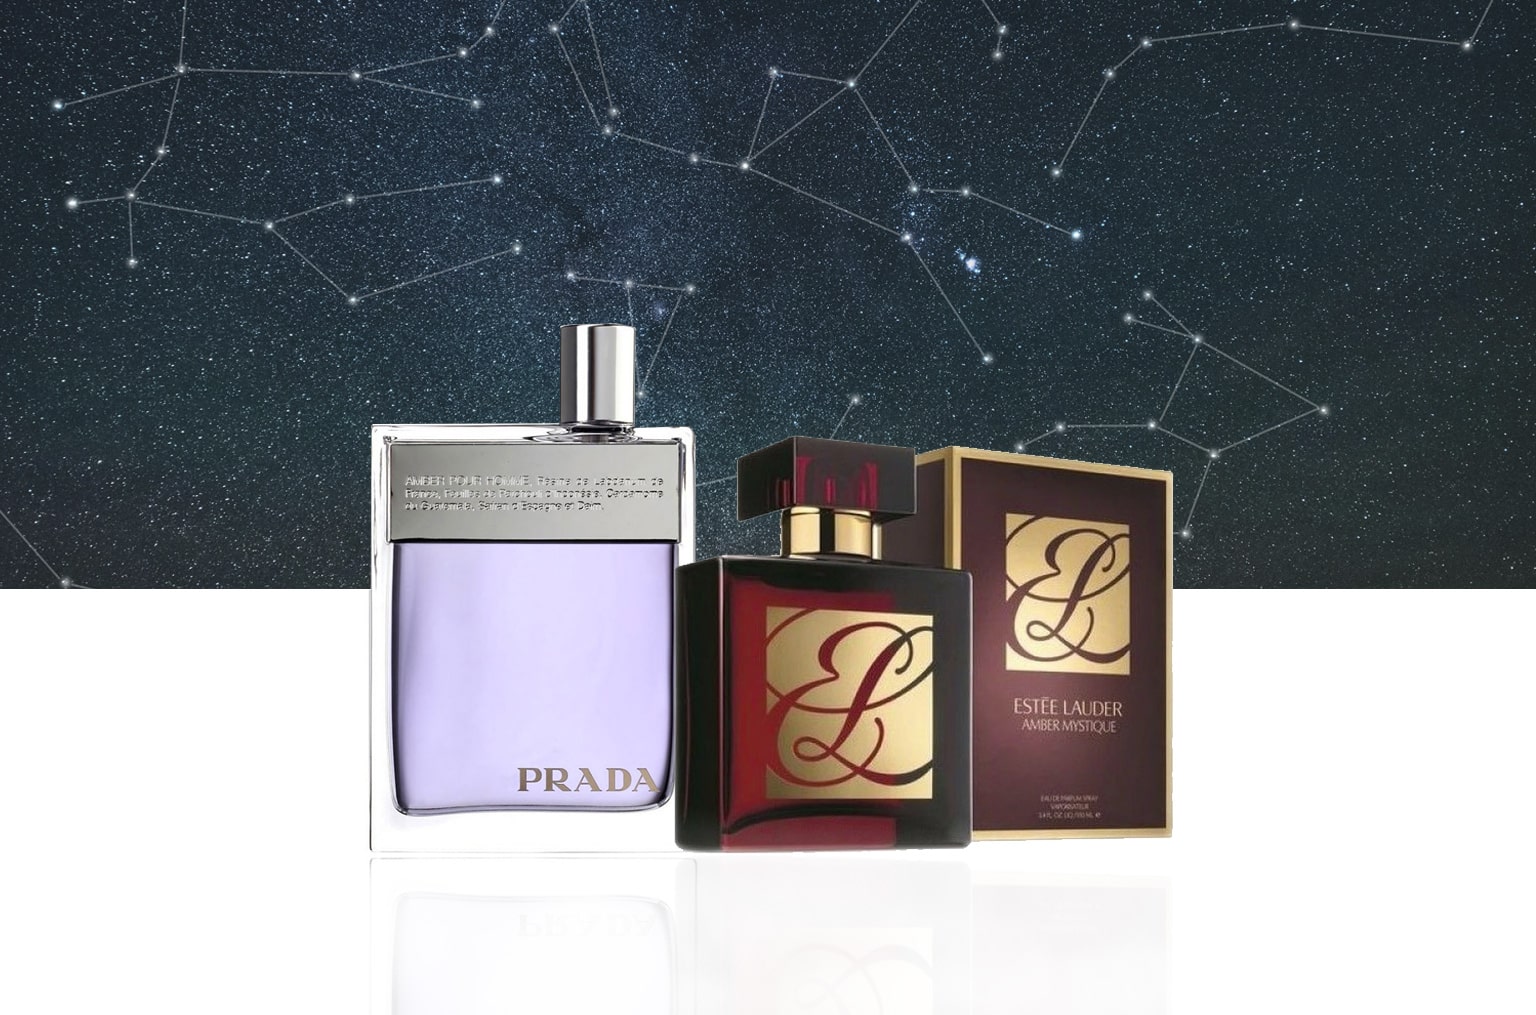 THESE ARE THE BEST PERFUMES TO MATCH YOUR ZODIAC ACCORDING TO A PERFUME AFICIONADO